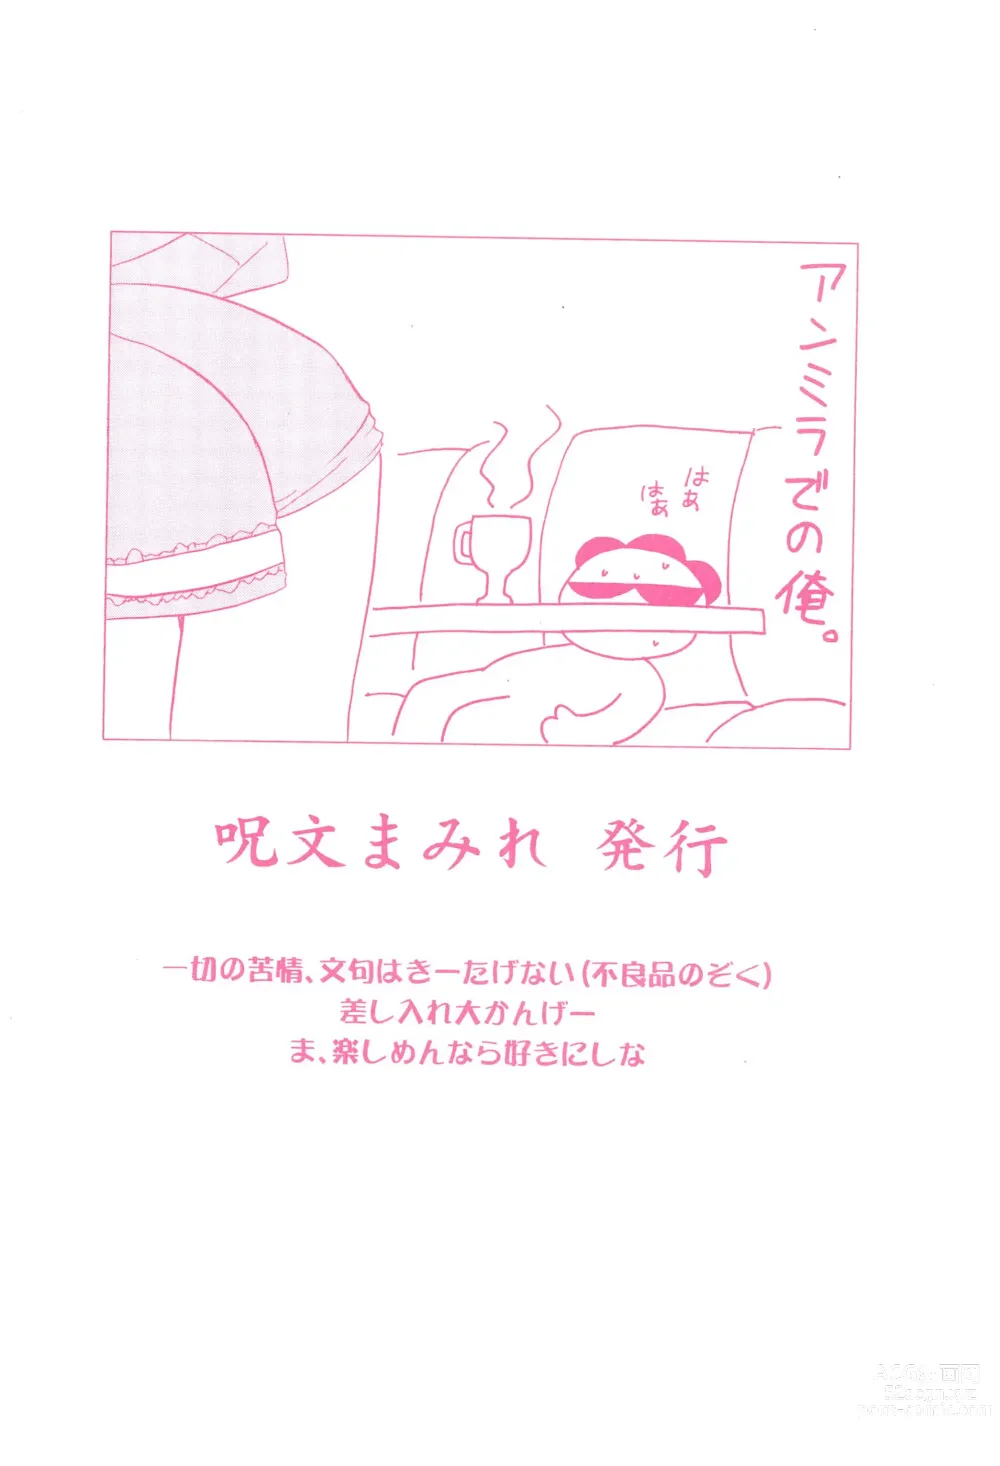 Page 34 of doujinshi Get Sweet ”A” Low Phone Anna Mirrors ORIGINAL STORY